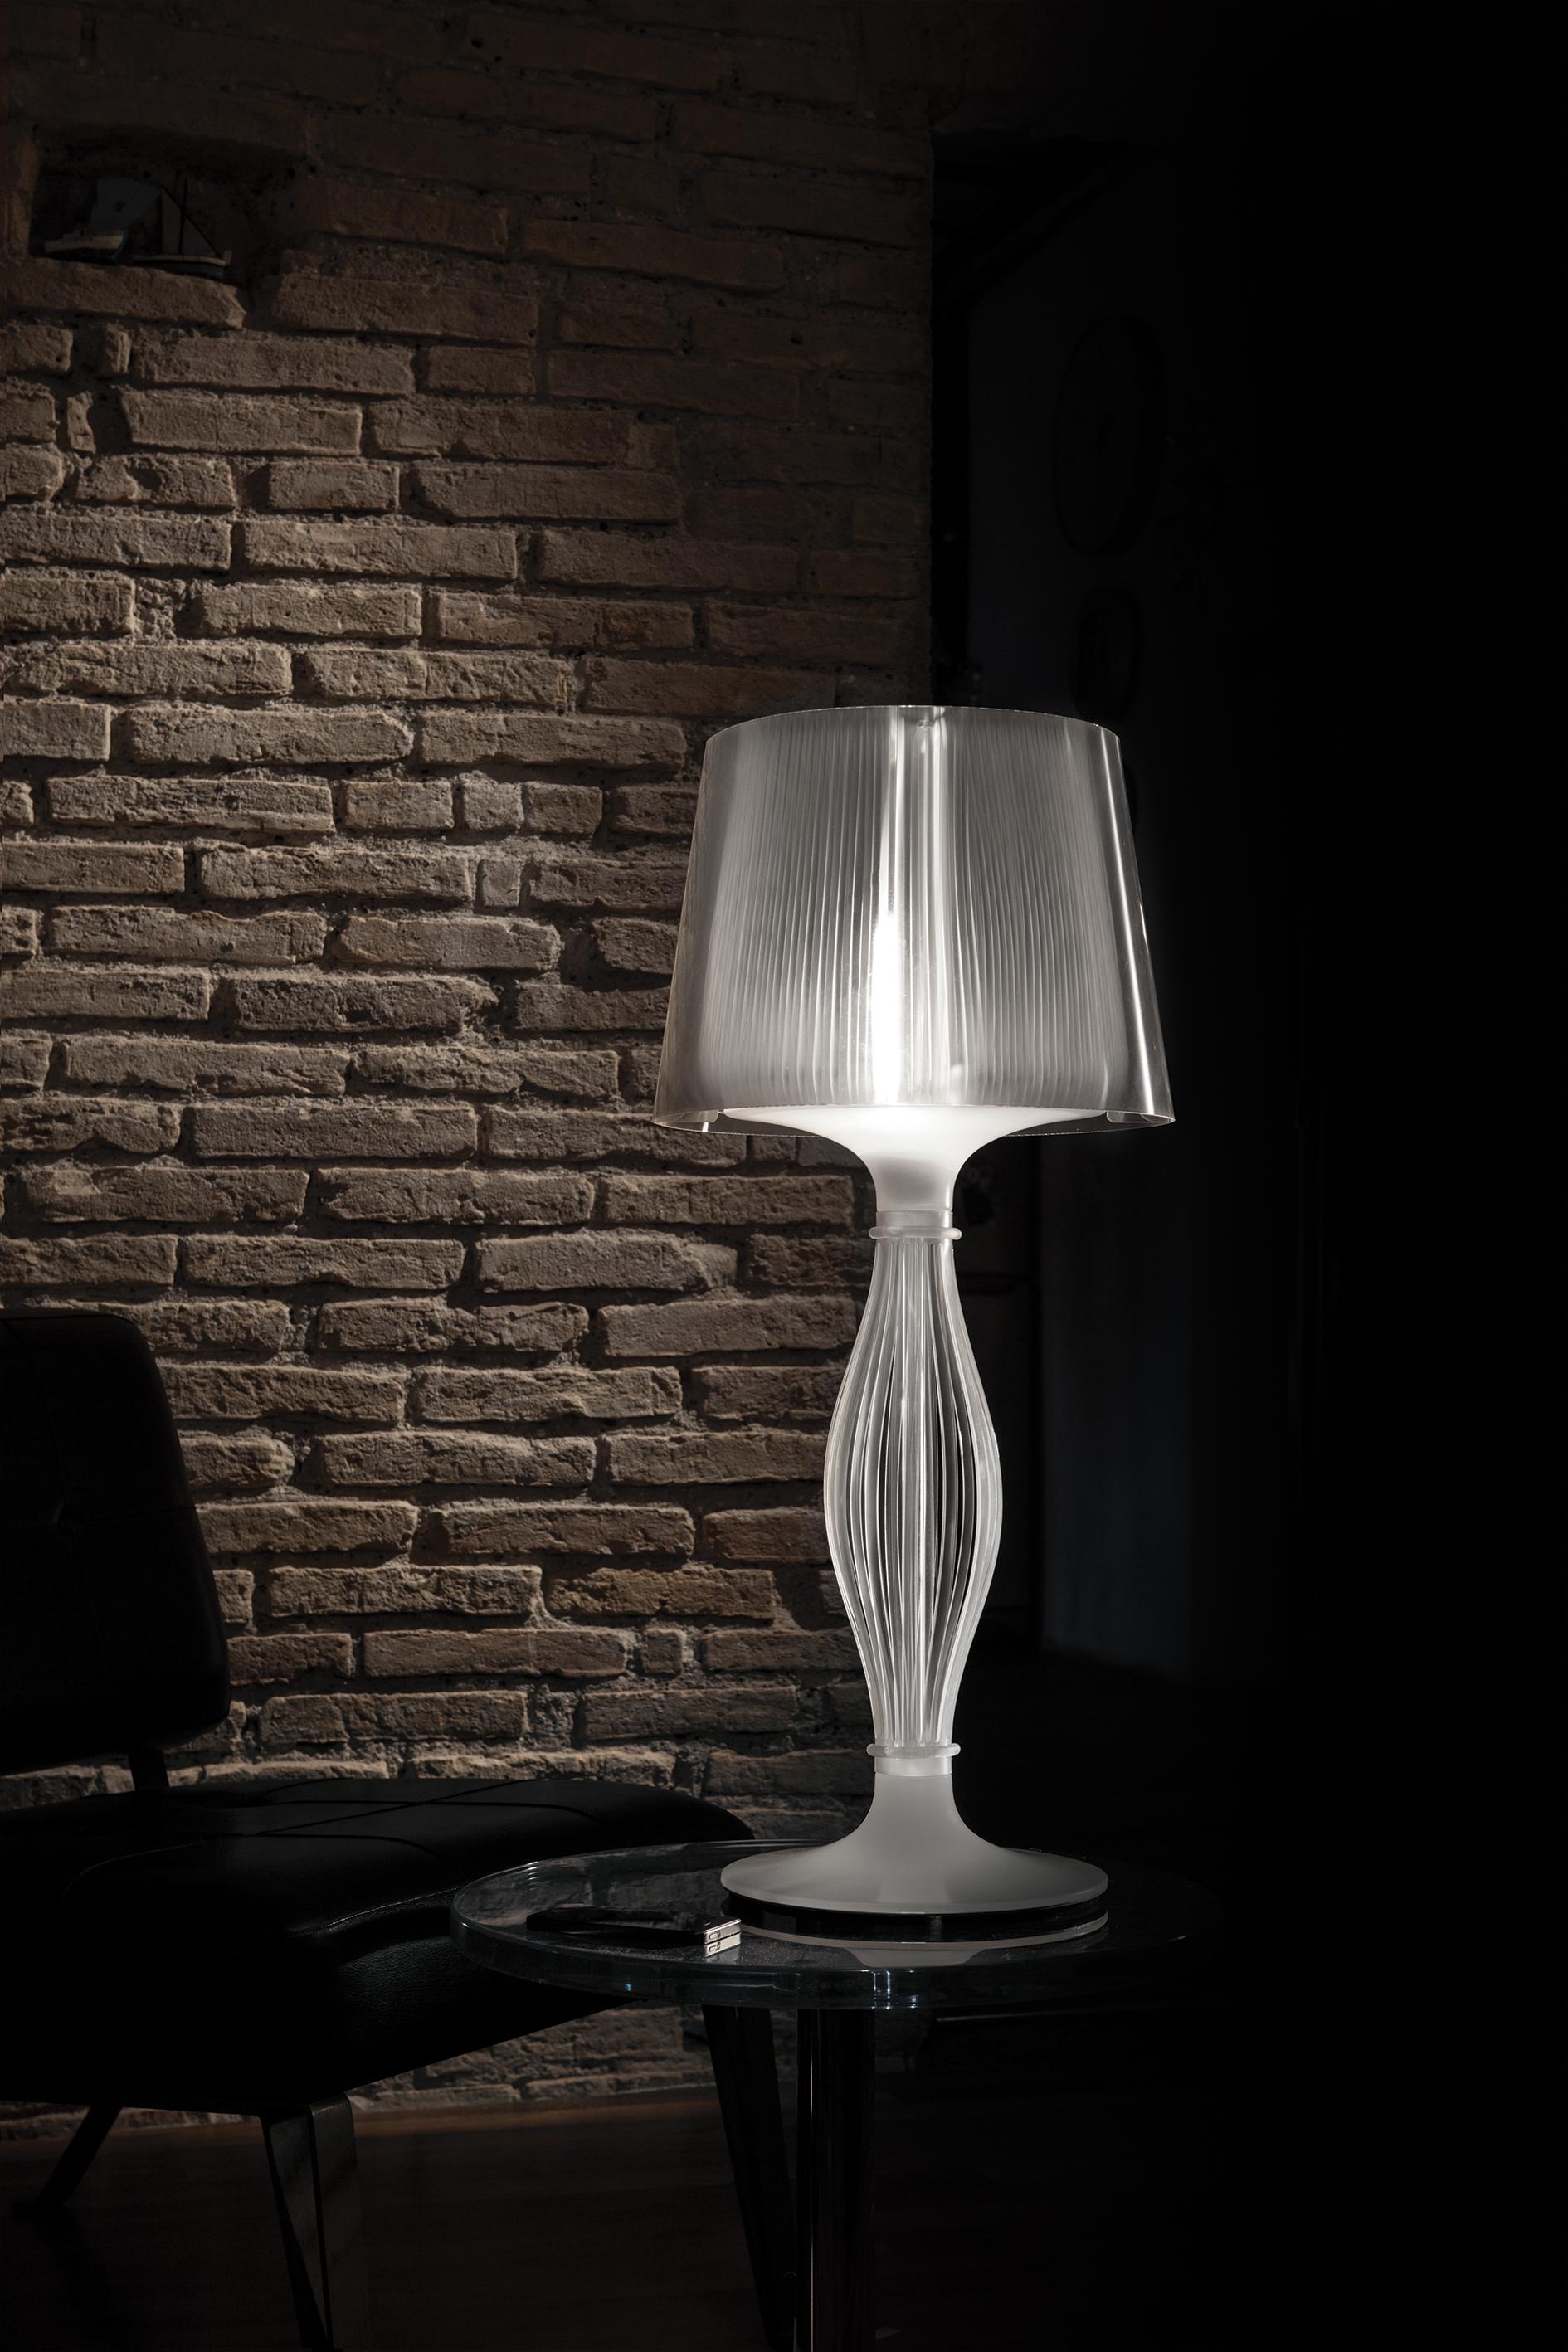 The masterpiece of the Liza collection is the iconic, baroque-inspired table lamp, available in the classic Prisma version, as well as a new Pewter version, both using SLAMP’s patented techno-polymer materials. Liza has a double illumination system,